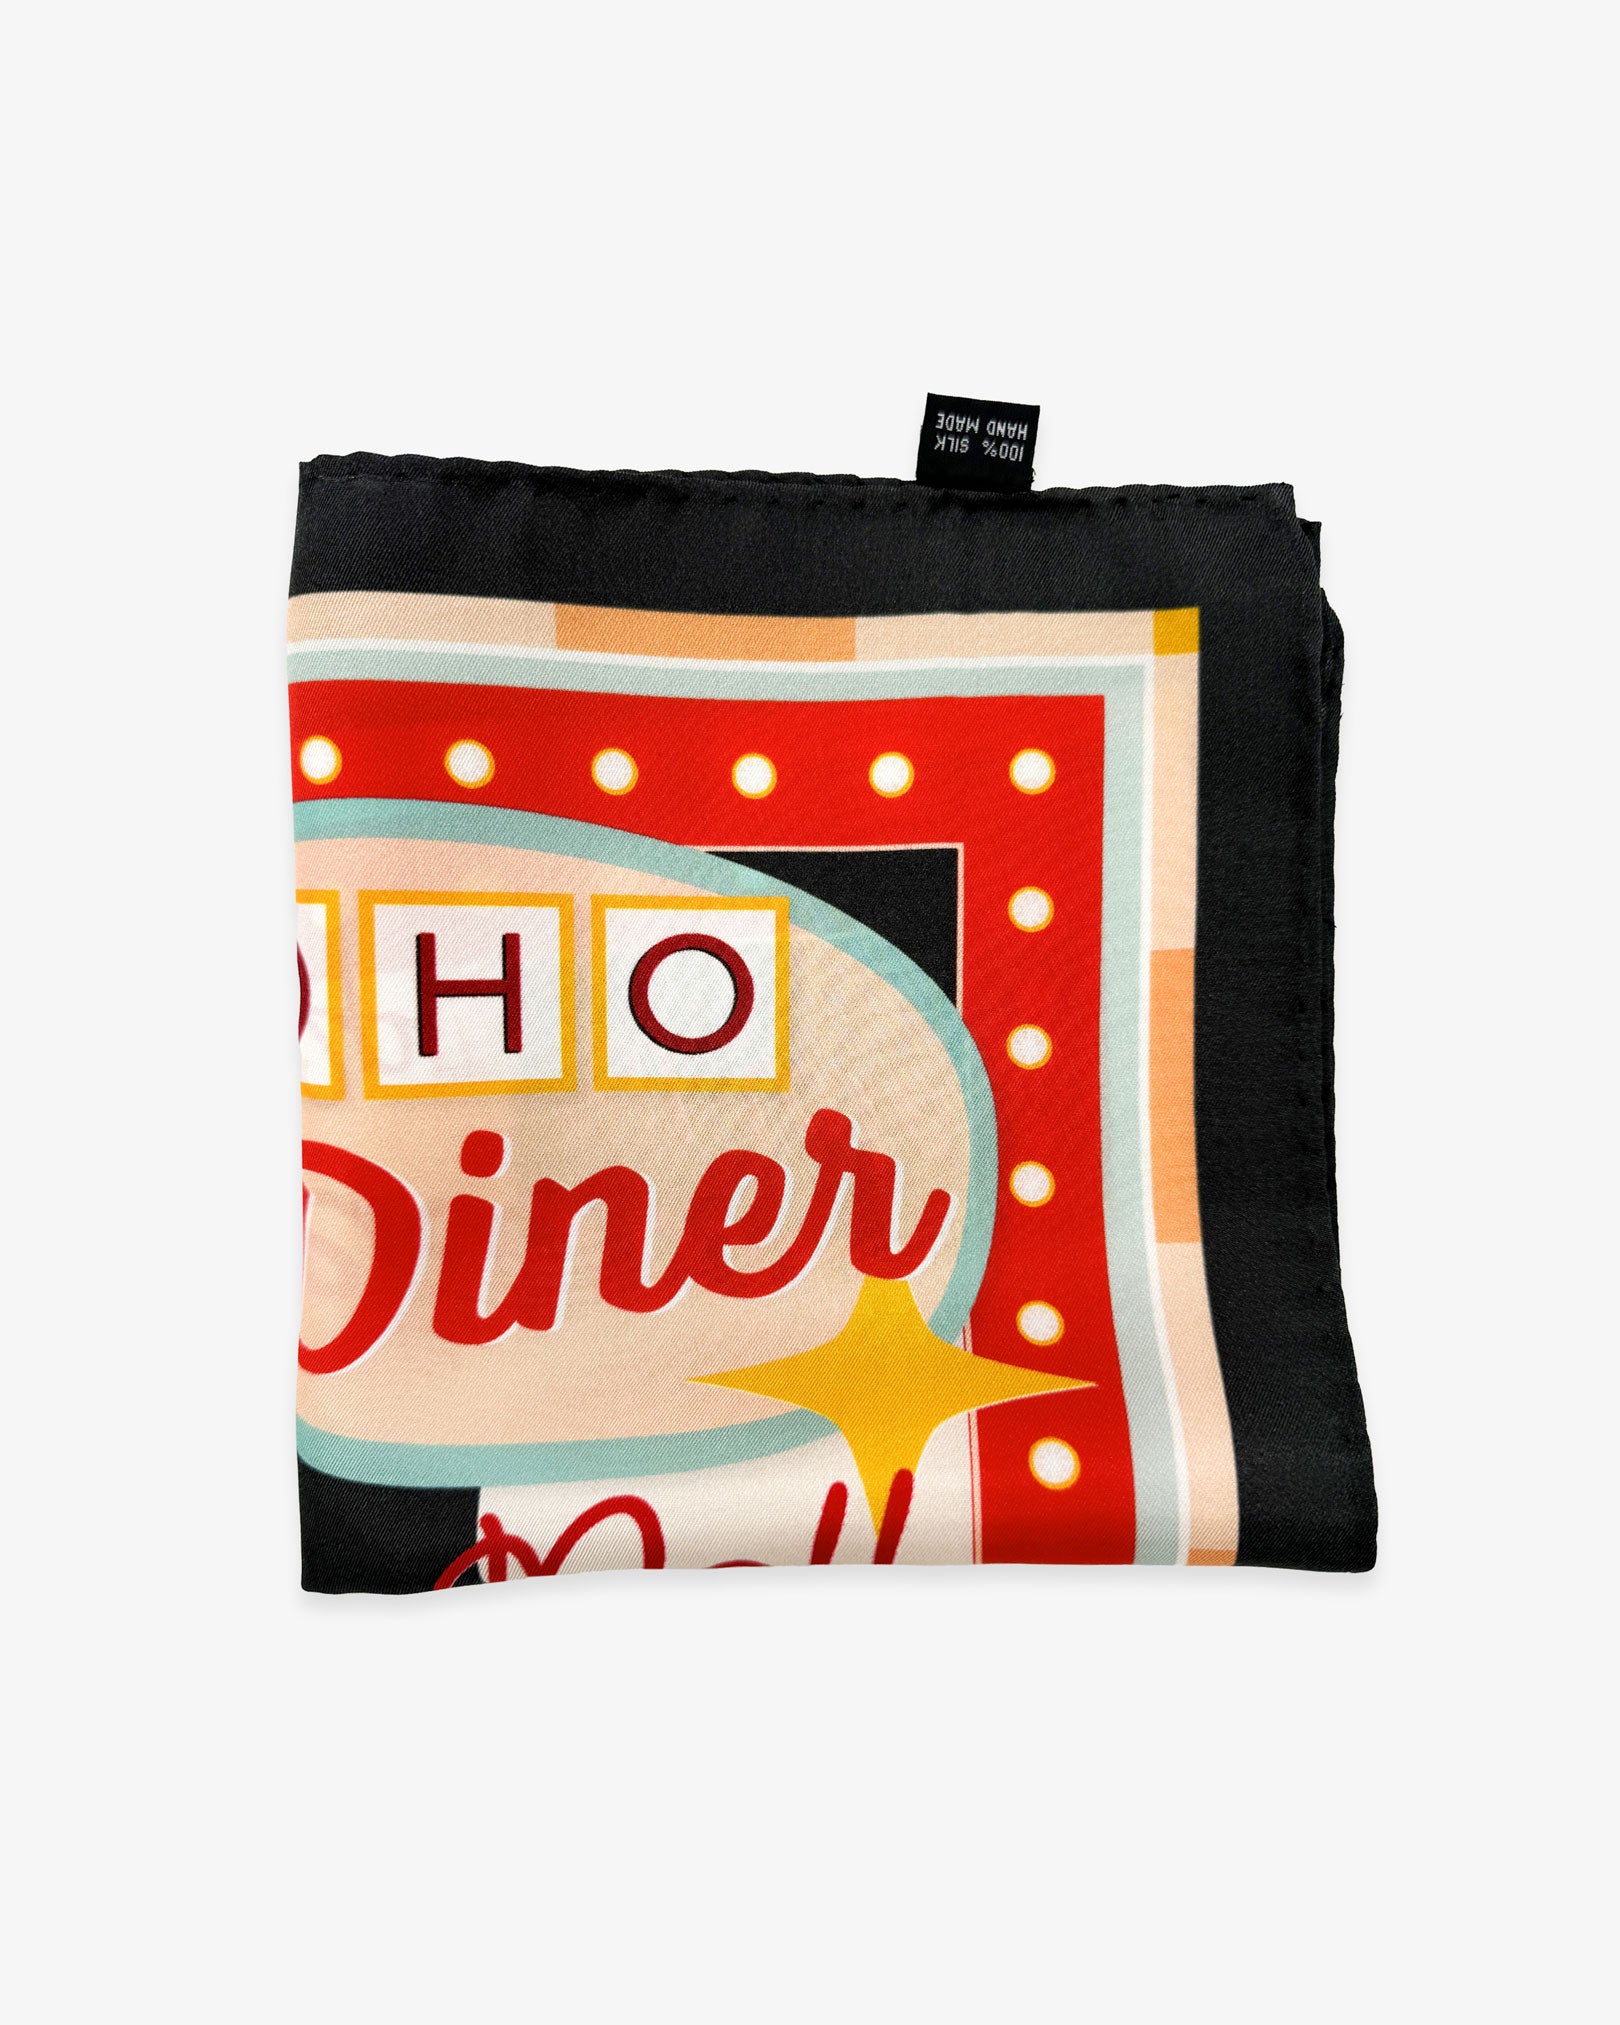 The 'Milkshake' on charcoal silk pocket square from SOHO Scarves folded into a quarter, showing a portion of the 1950's diner aesthetic and charcoal border.